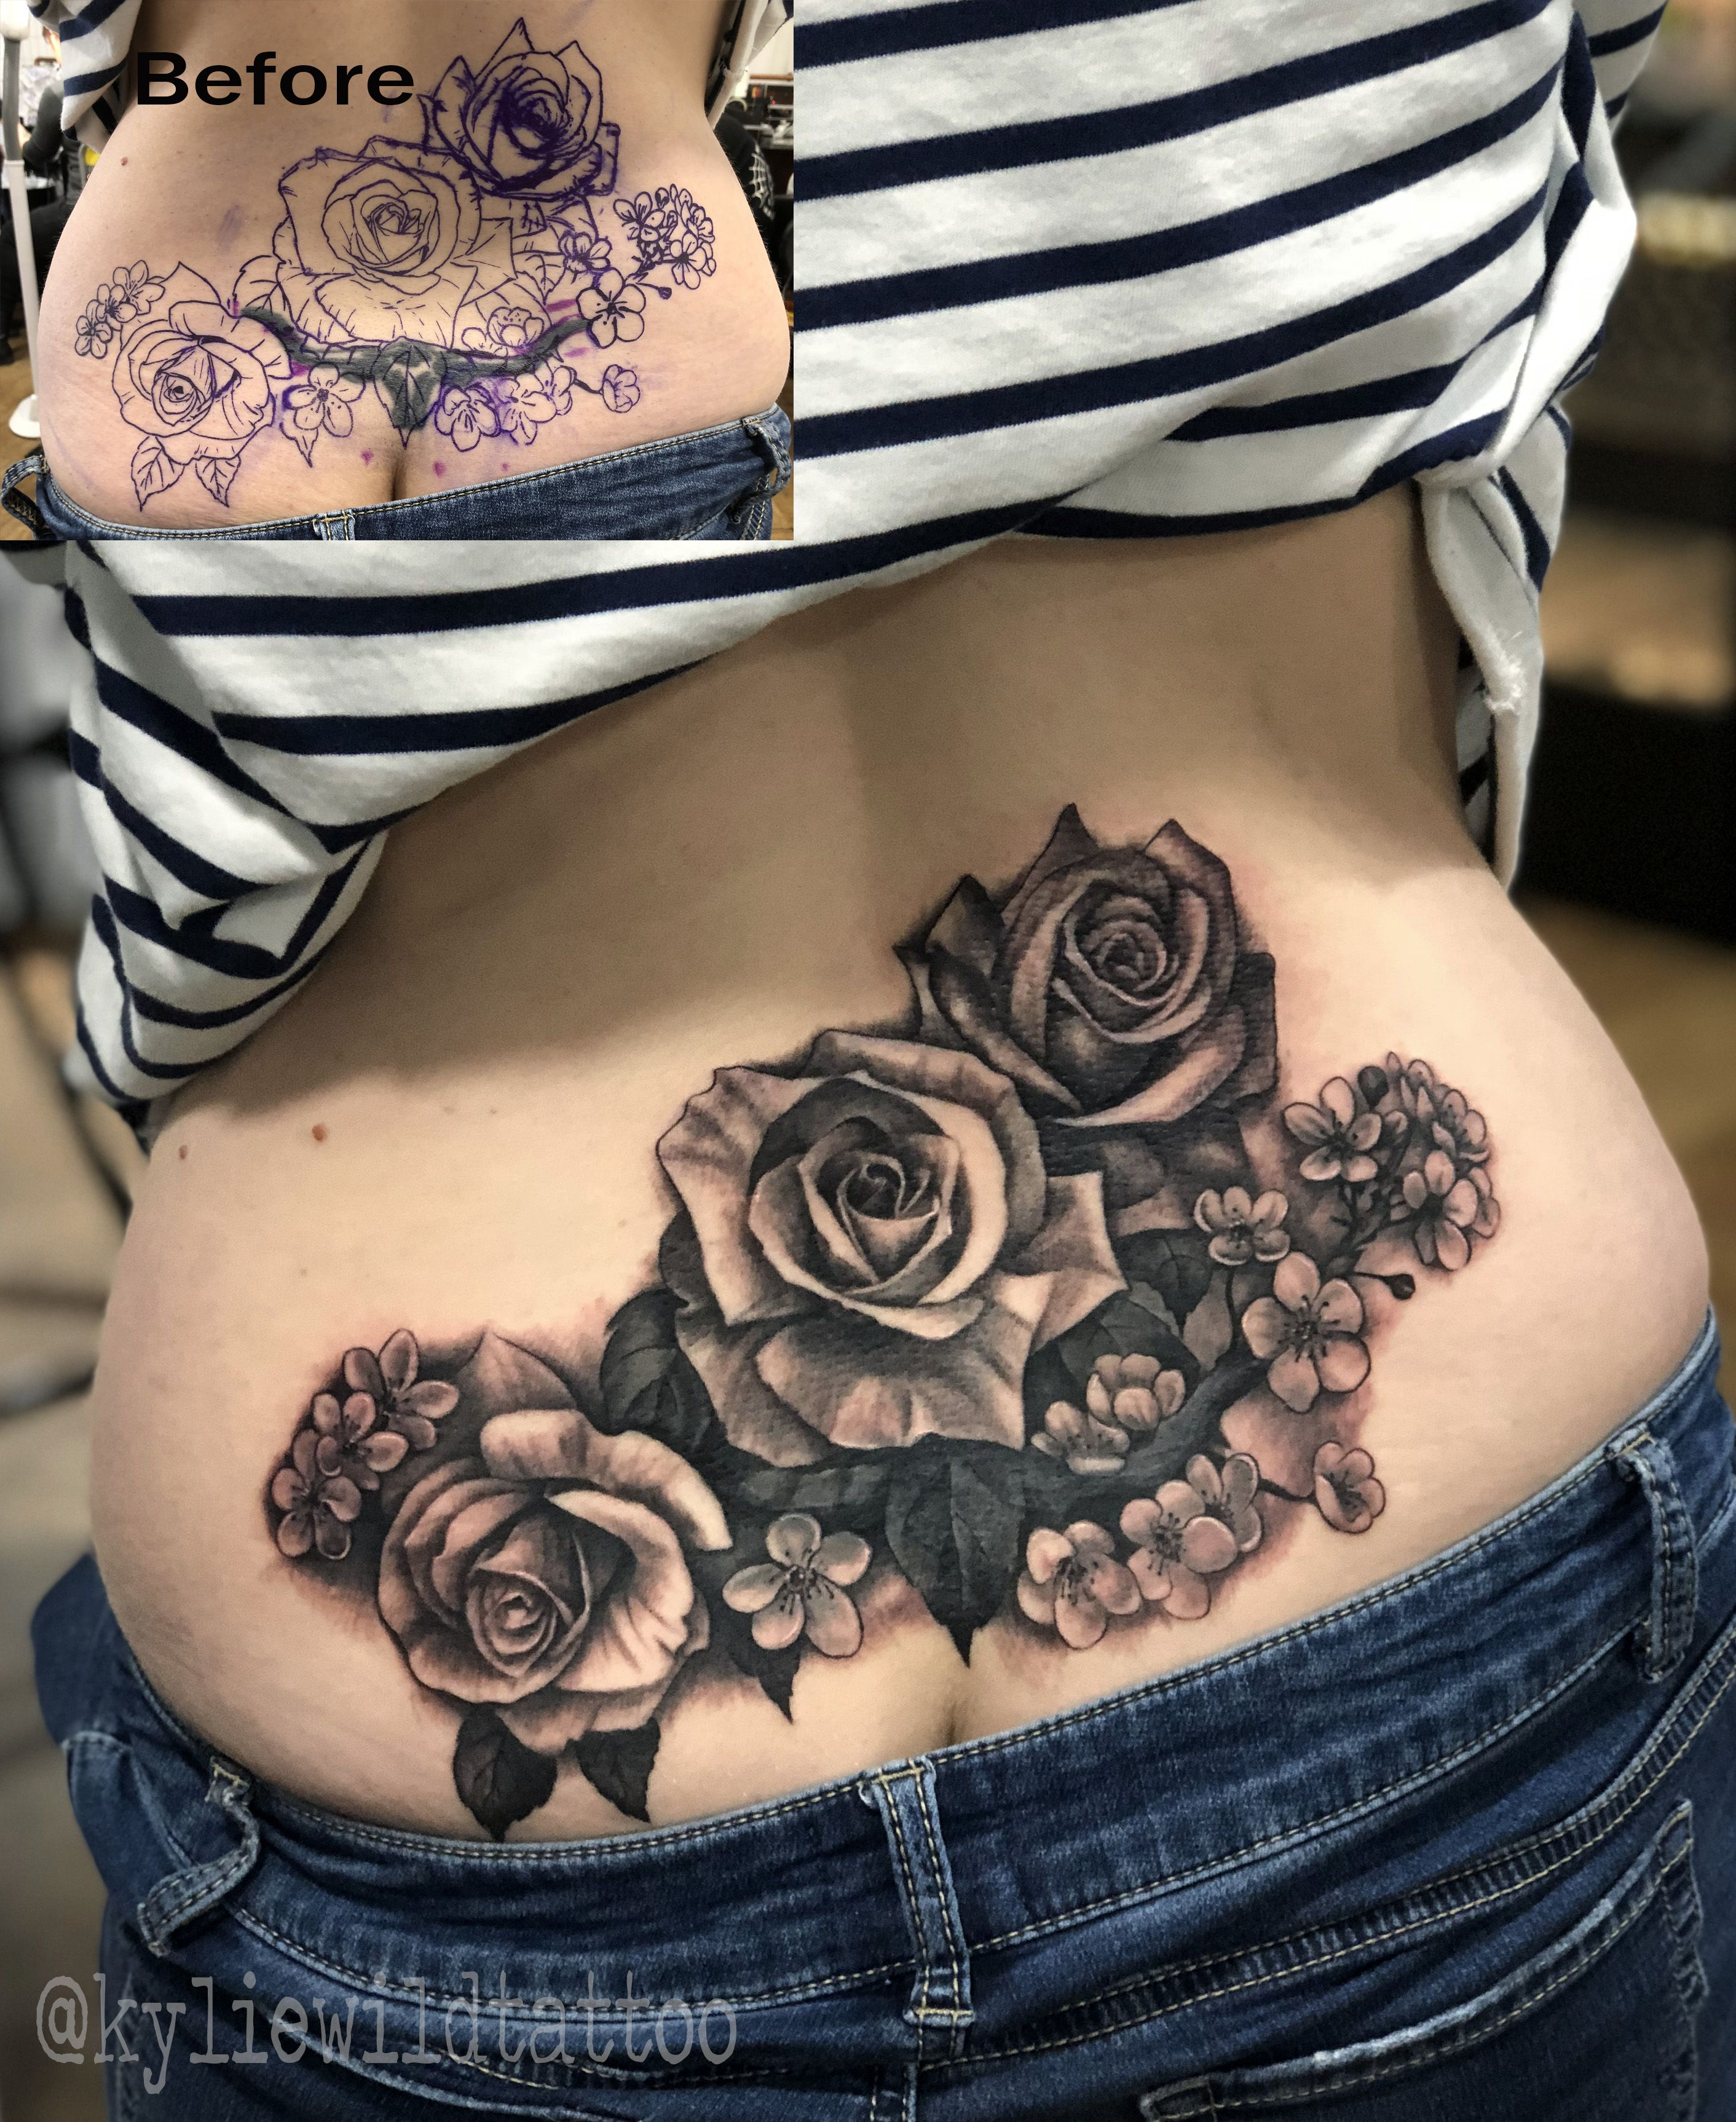 Tramp Stamp Lower Back Cover Up Tattoo With Roses And Cherry regarding dimensions 2824 X 3452